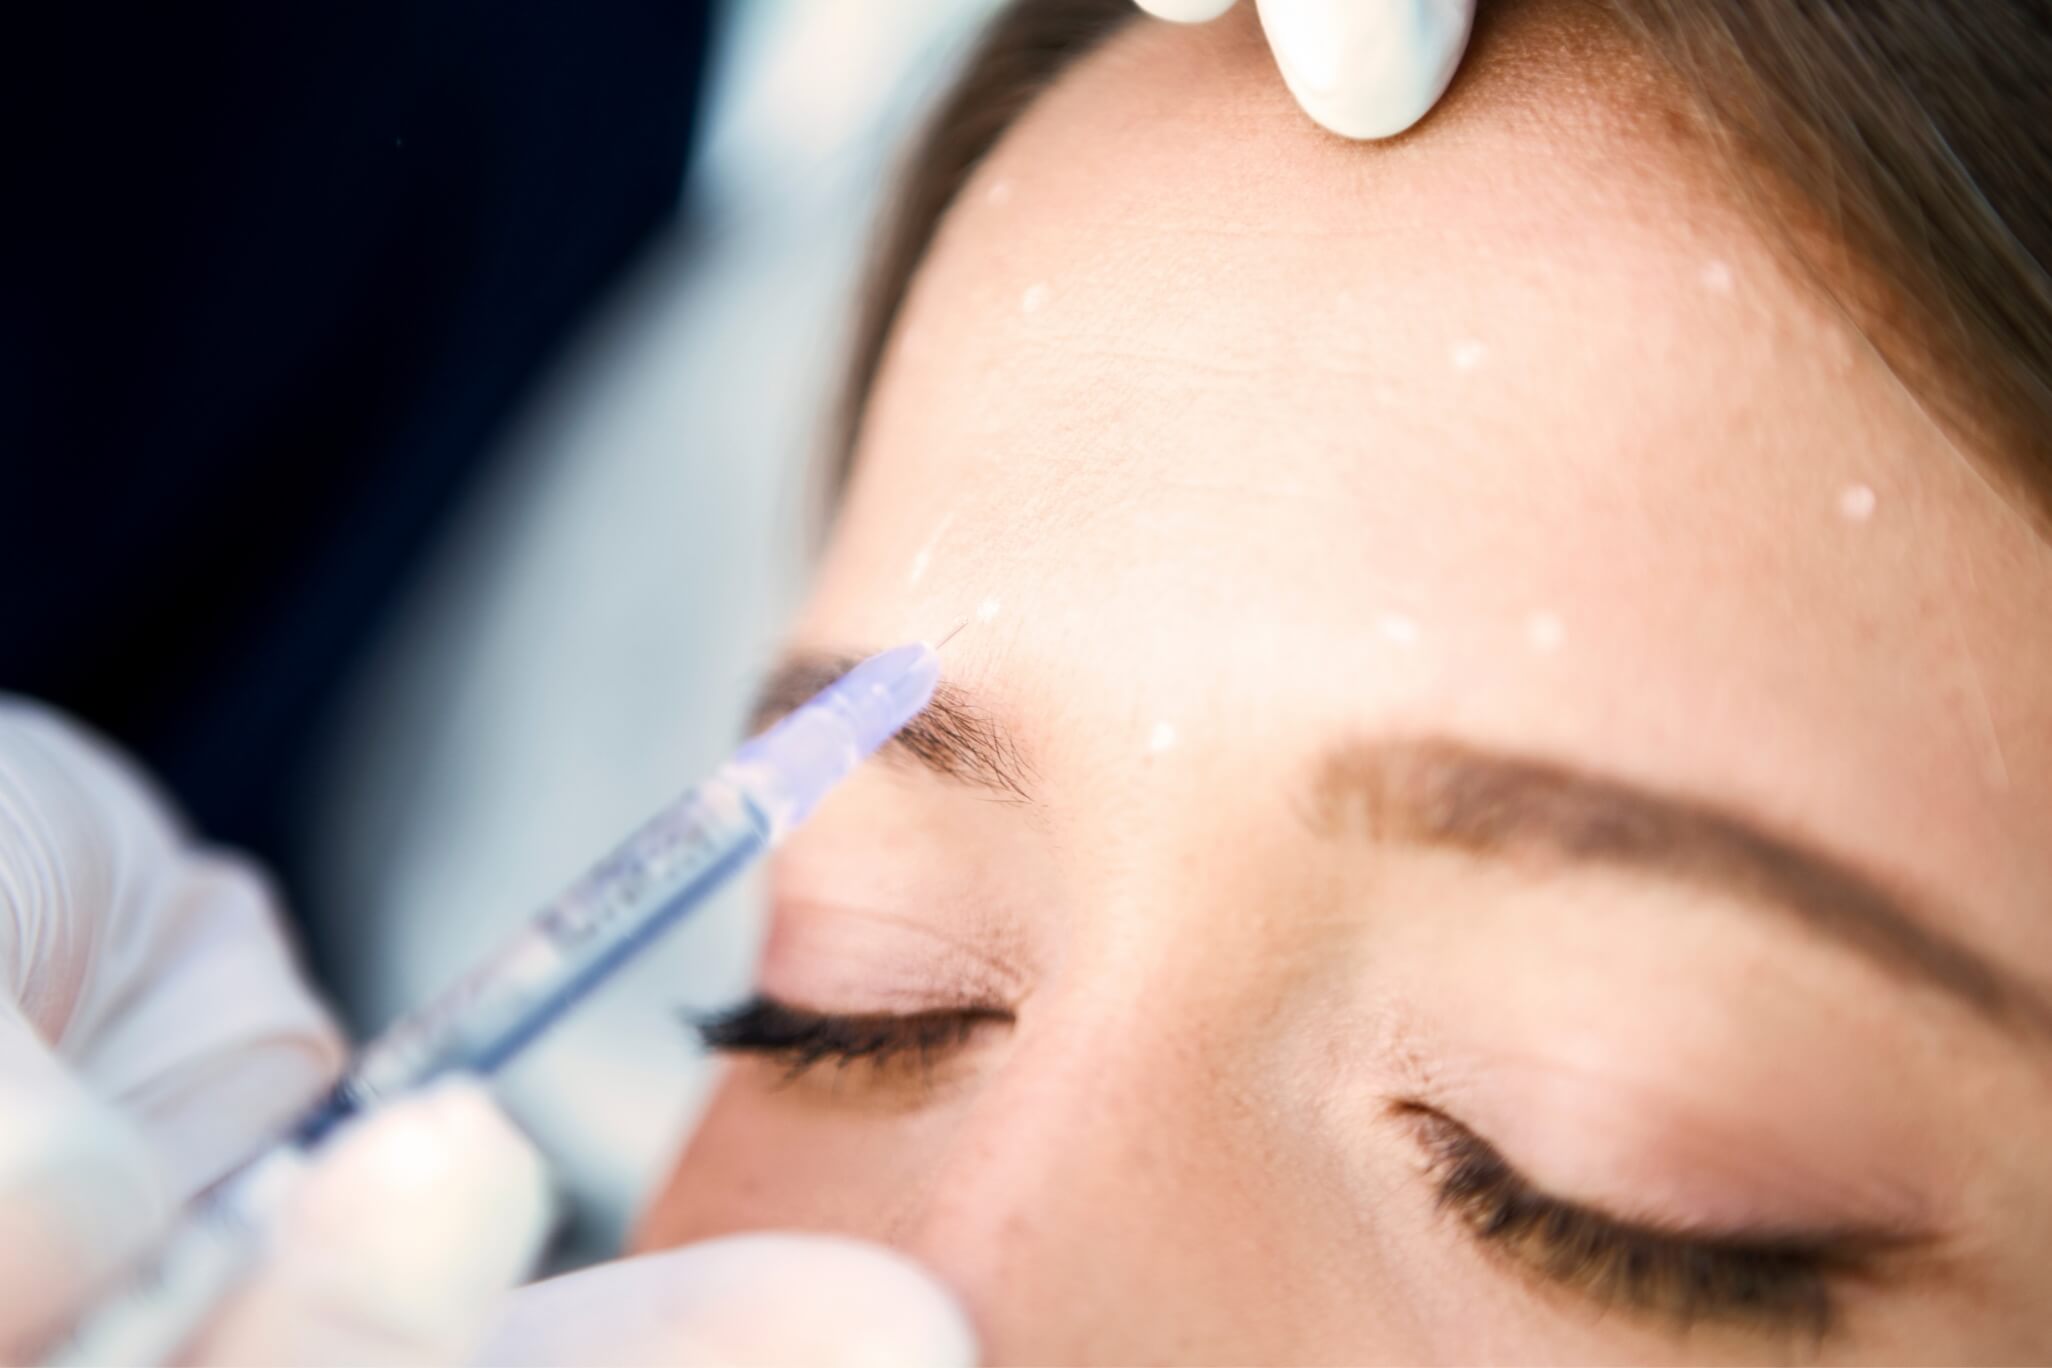 Practitioner using botox injection on woman's face